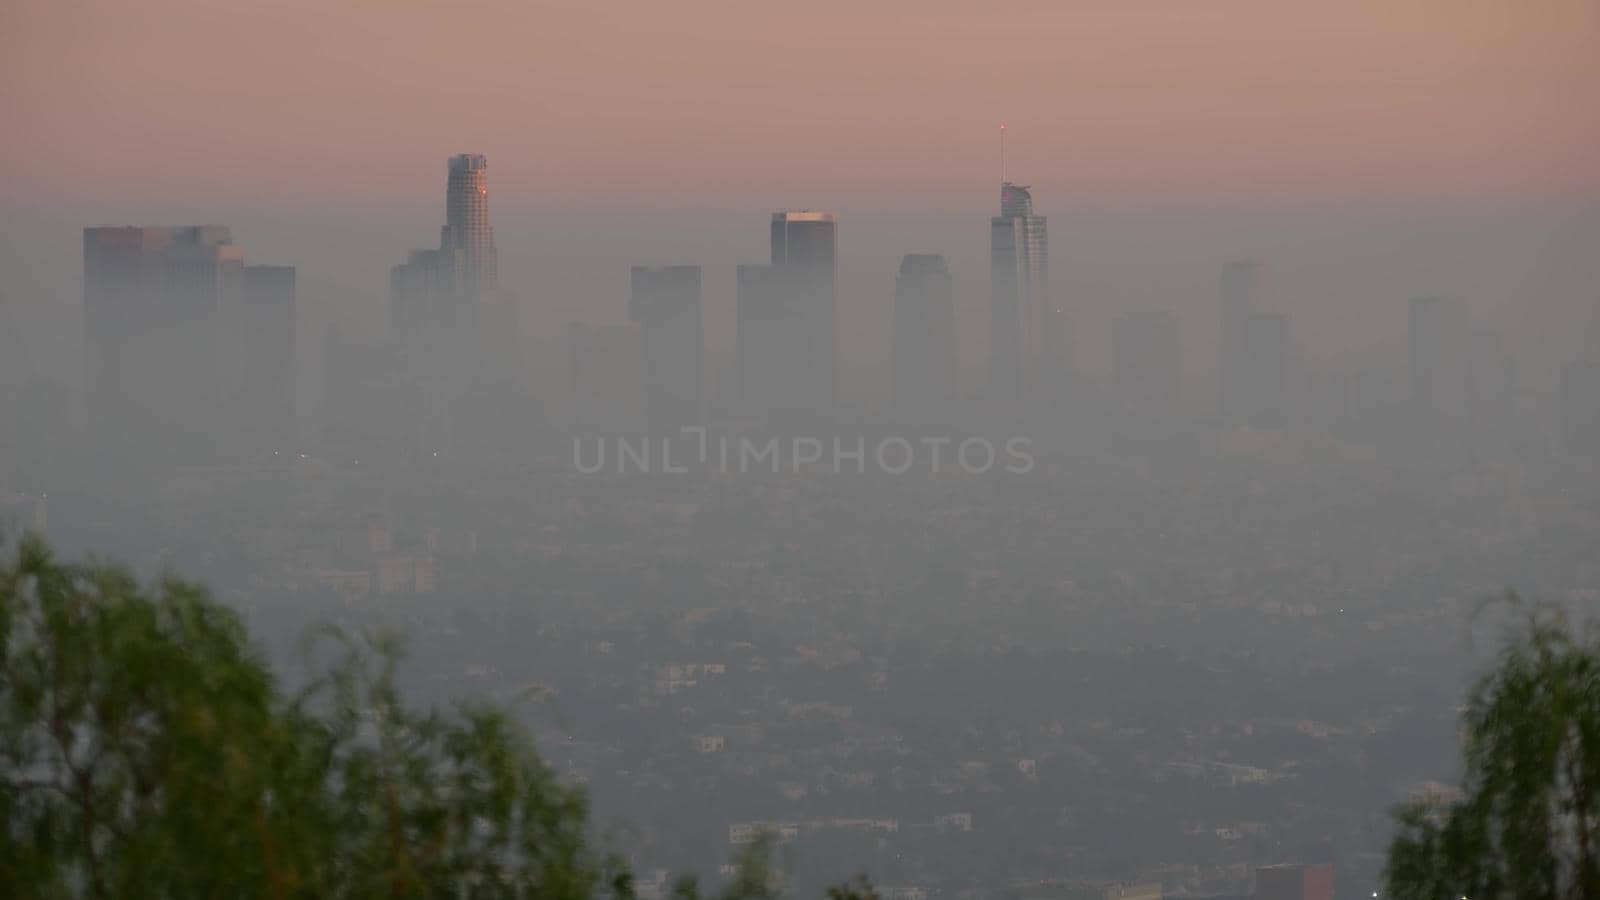 Highrise skyscrapers of metropolis in smog, Los Angeles, California USA. Air toxic pollution and misty urban downtown skyline. Cityscape in dirty fog. Low visibility in city with ecology problems by DogoraSun